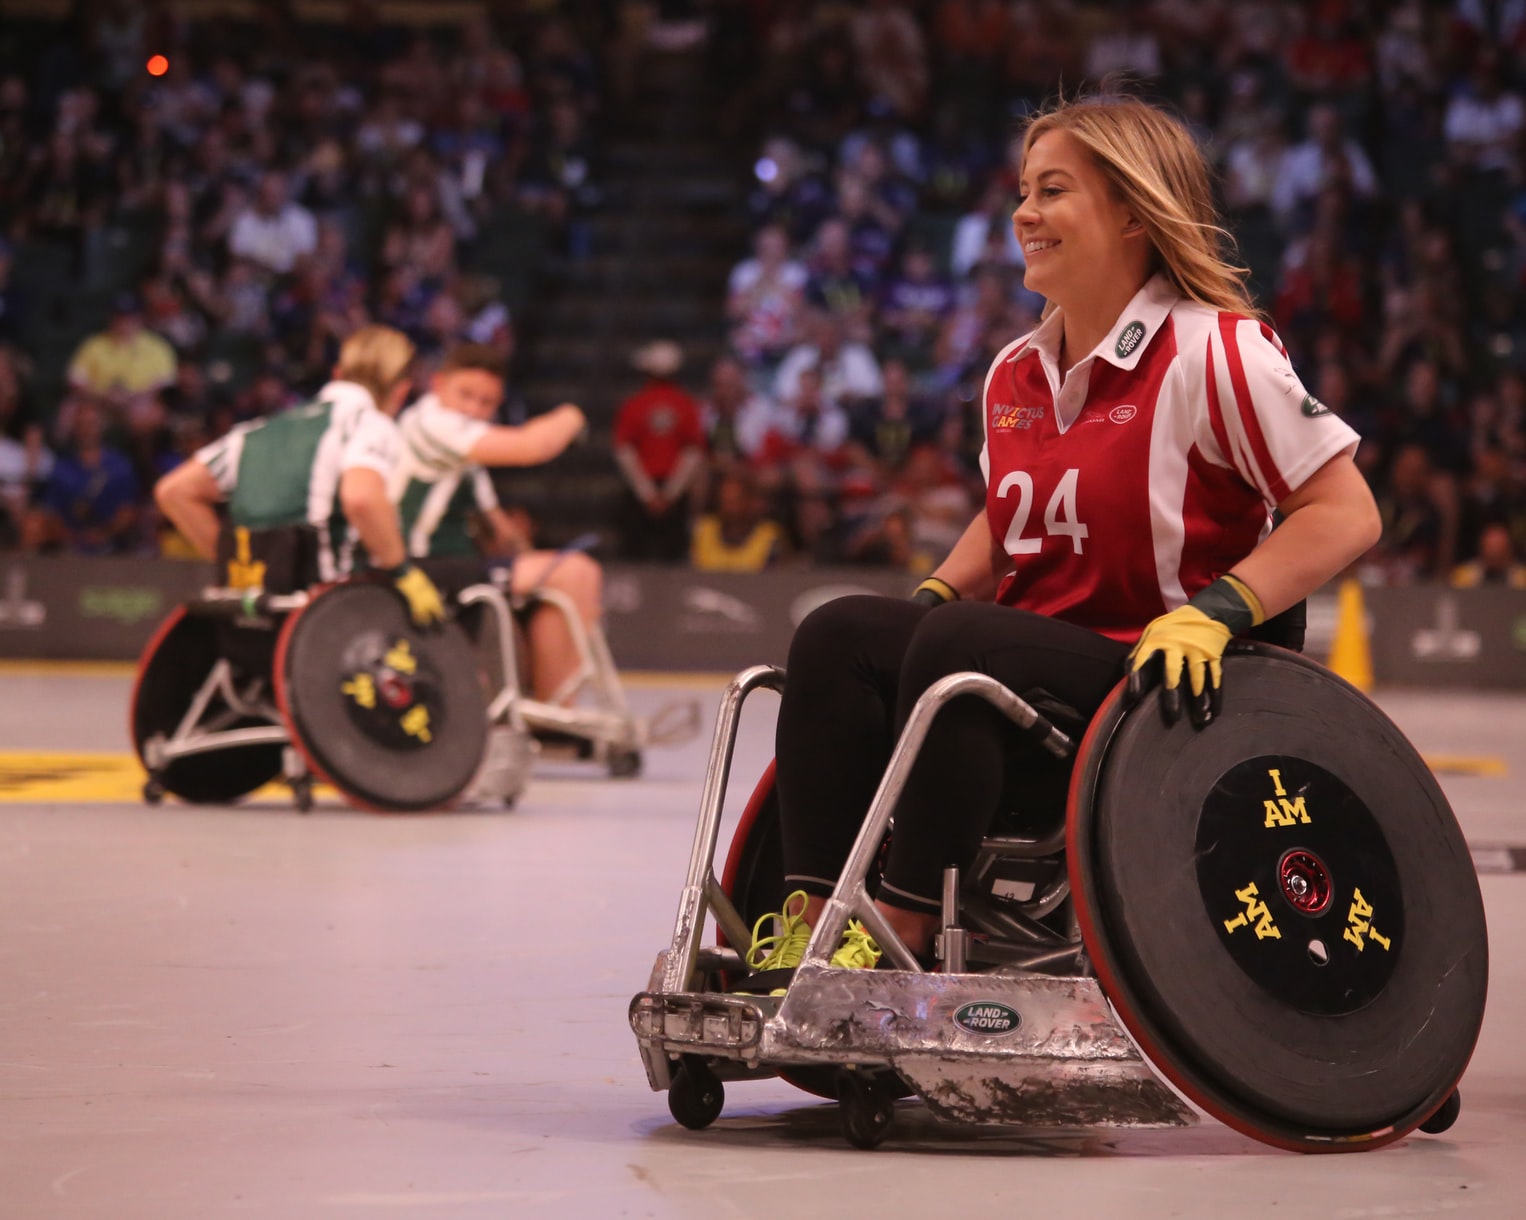 Image shows a woman in a wheelchair wearing a sporting top